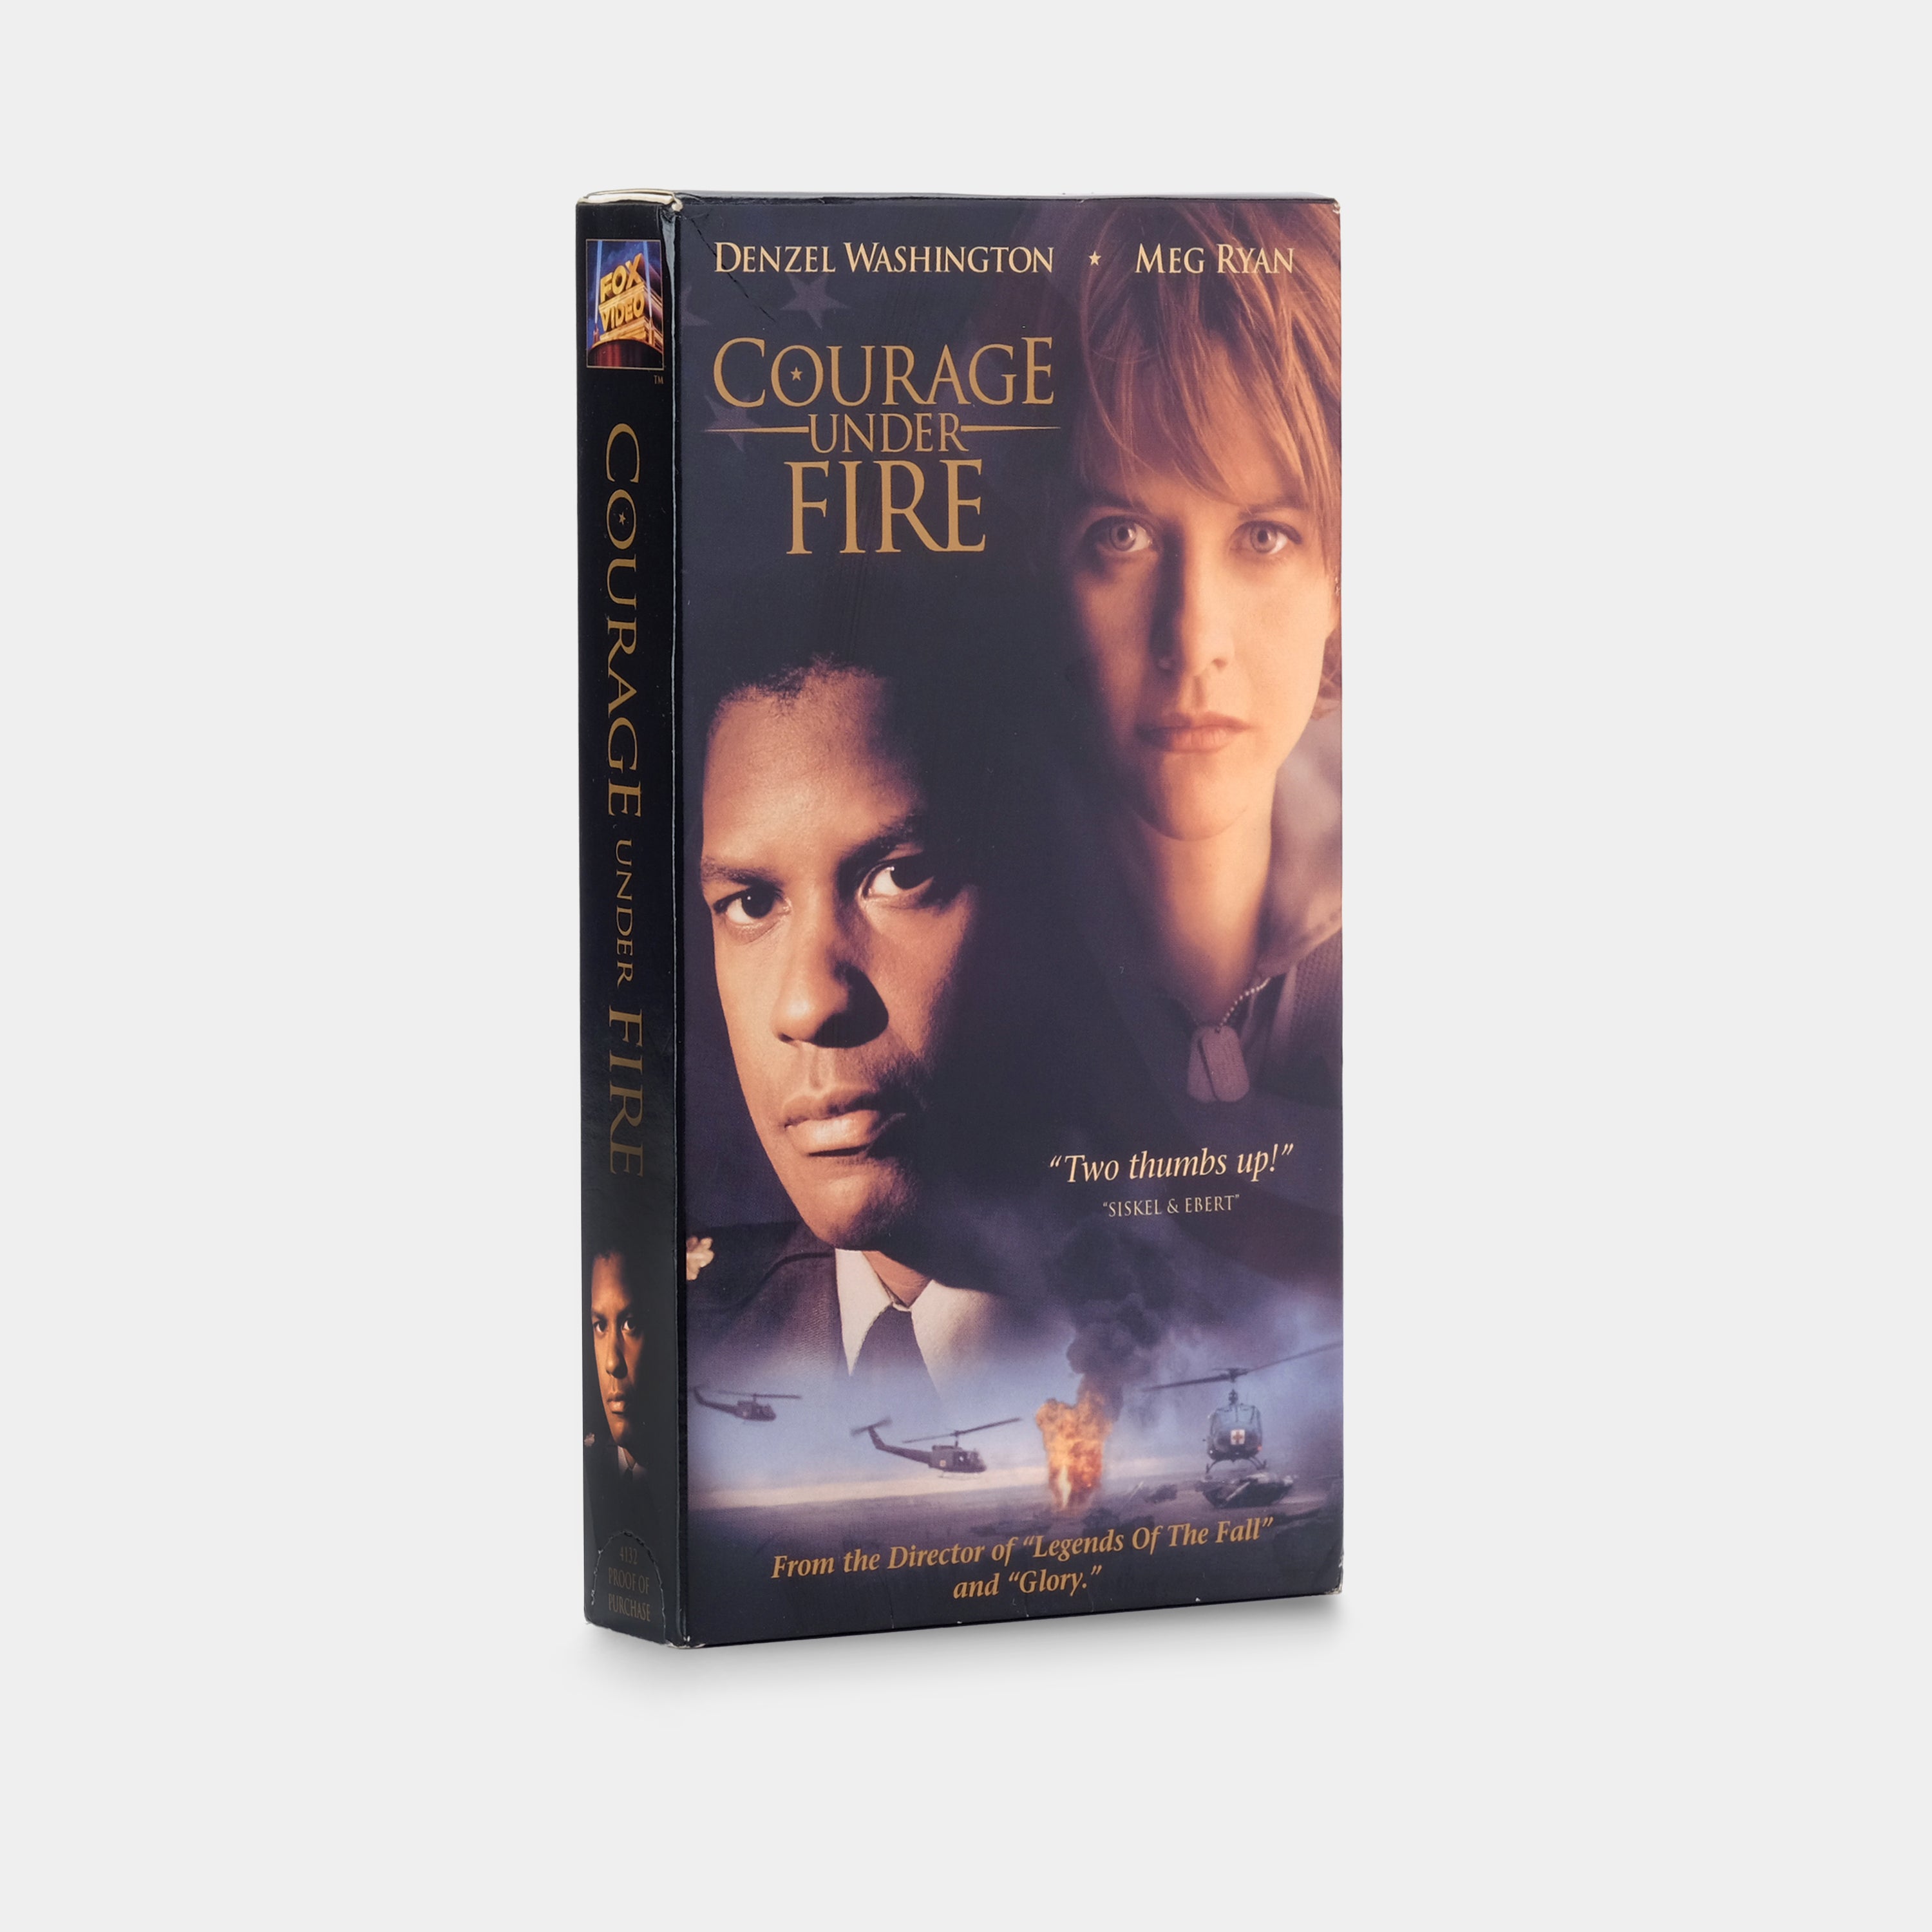 Courage Under Fire VHS Tape